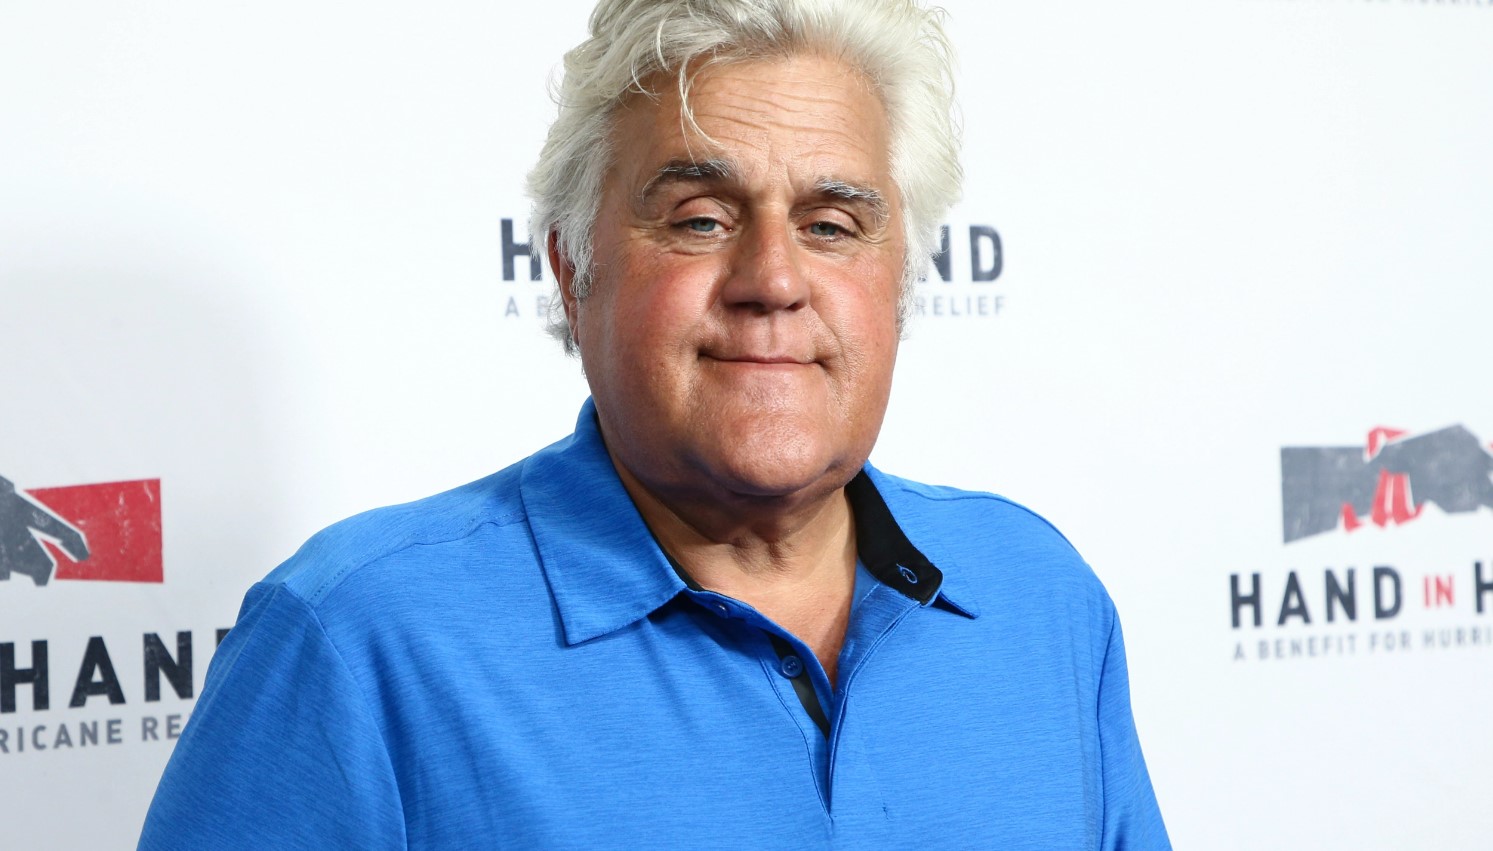 Jay Leno Suffers Broken Bones in Motorcycle Accident Two Months After Garage Fire